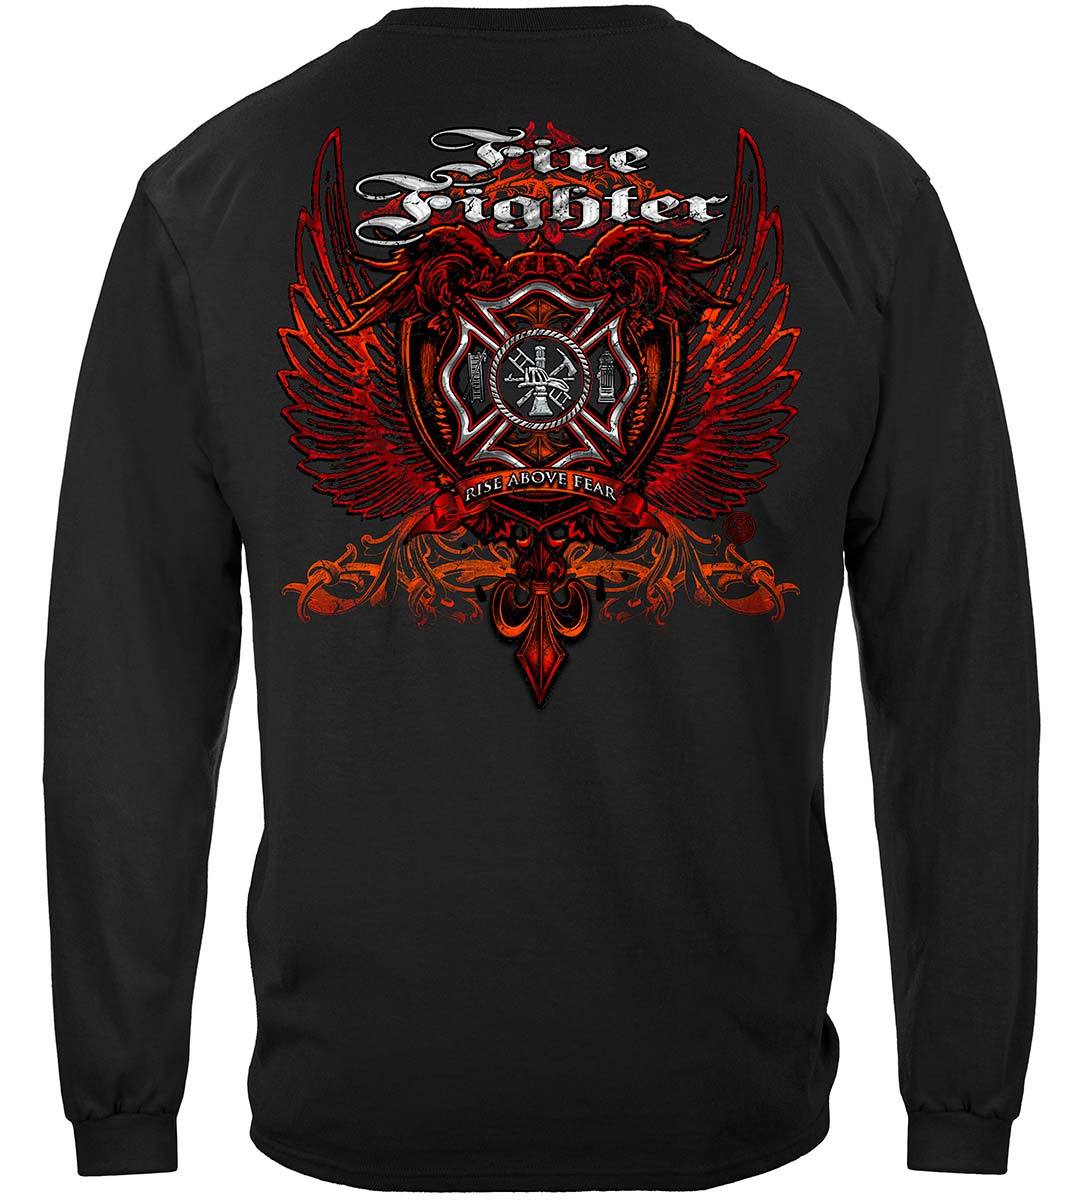 Firefighter Red Wings Rise Above Fear Silver Foil Premium Long Sleeves